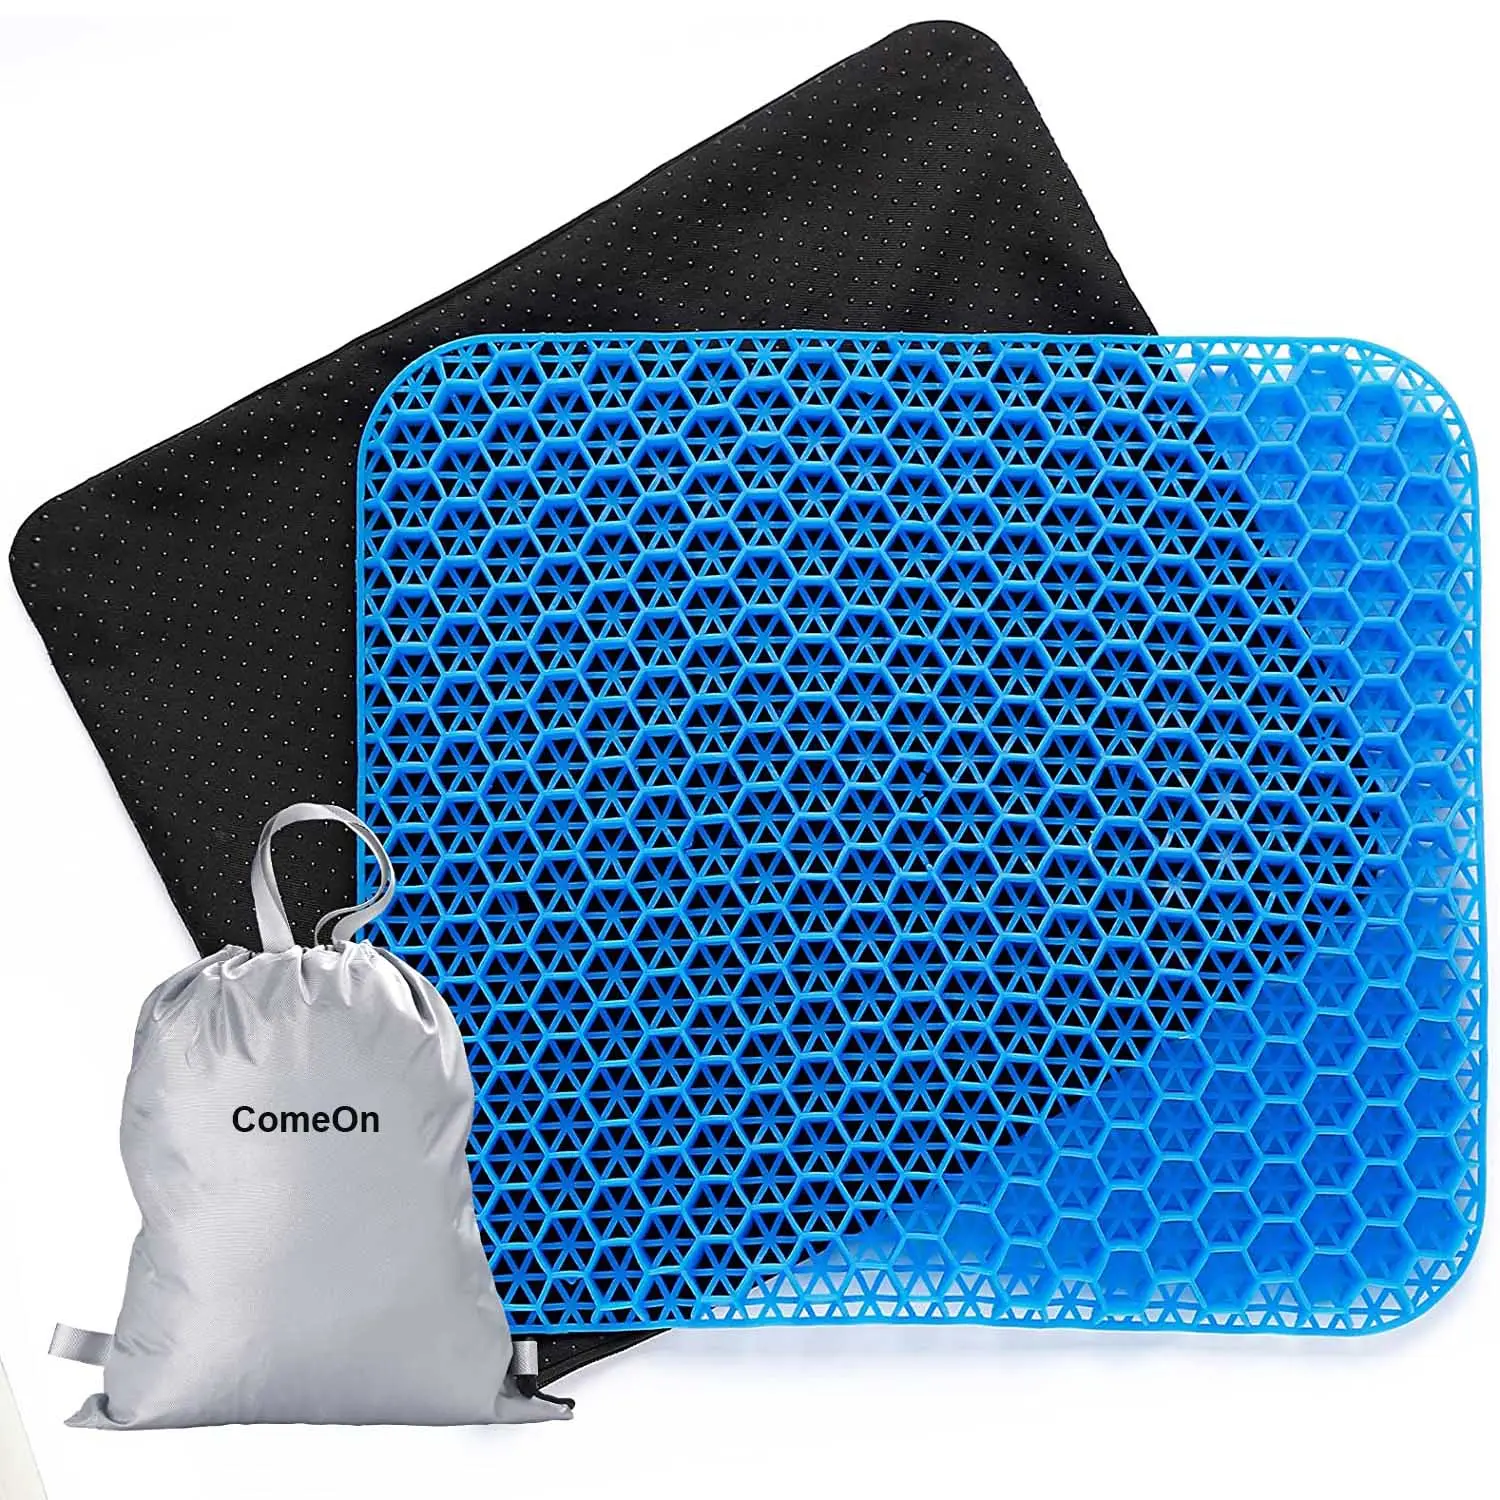 OEM Board Gel Seat Cushion Honeycomb Gel Kayak Cushions with Washable Non-Slip Cover Gel Seat Cushion Honeycomb for Long Sitting